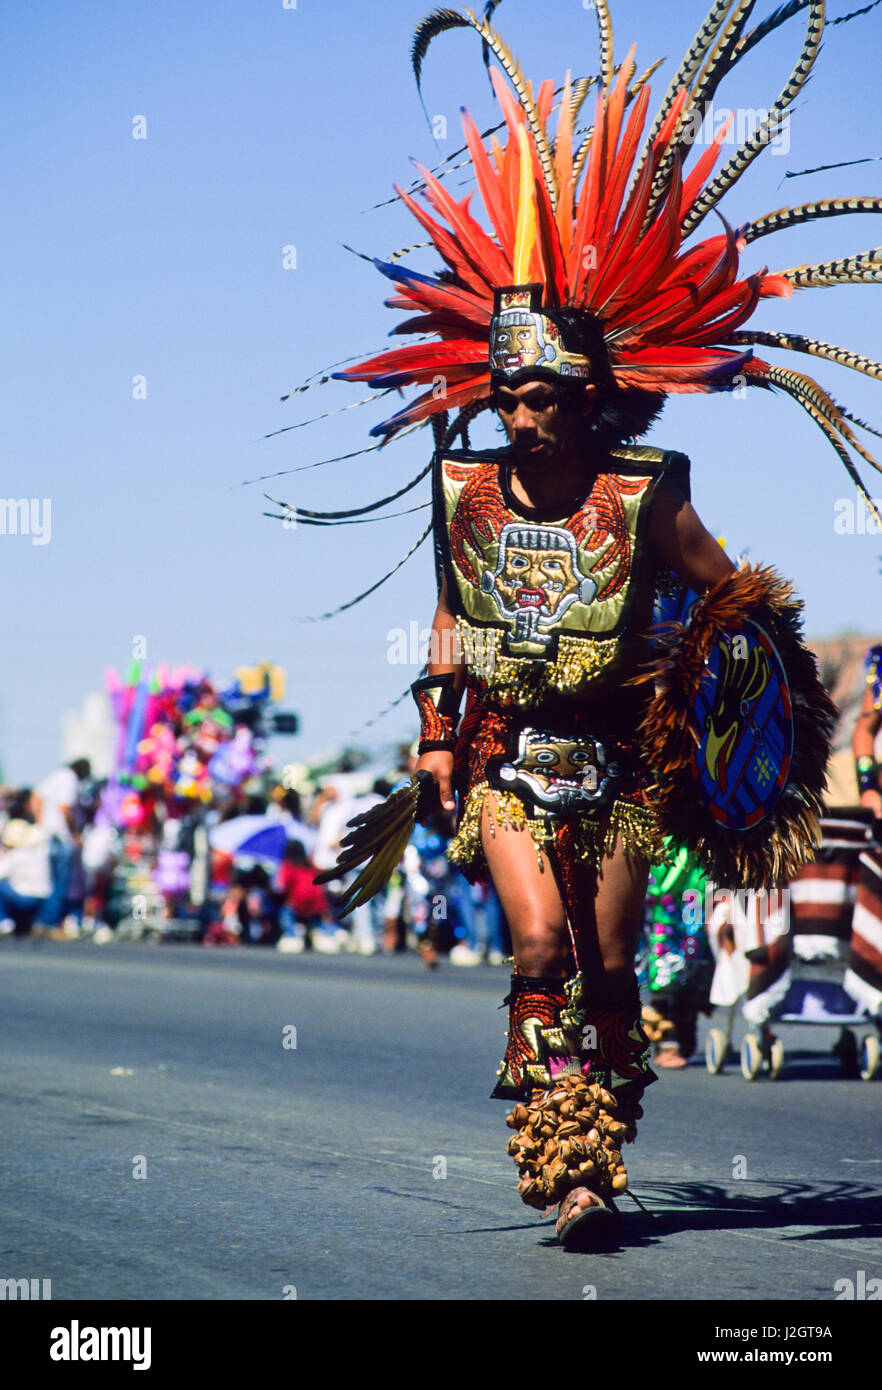 Aztec man wears traditional large headdress made from long colorful feathers, a decorative chest plate, breechcloth and leg rattles during an Inter-tribal parade in Gallup New Mexico Stock Photo